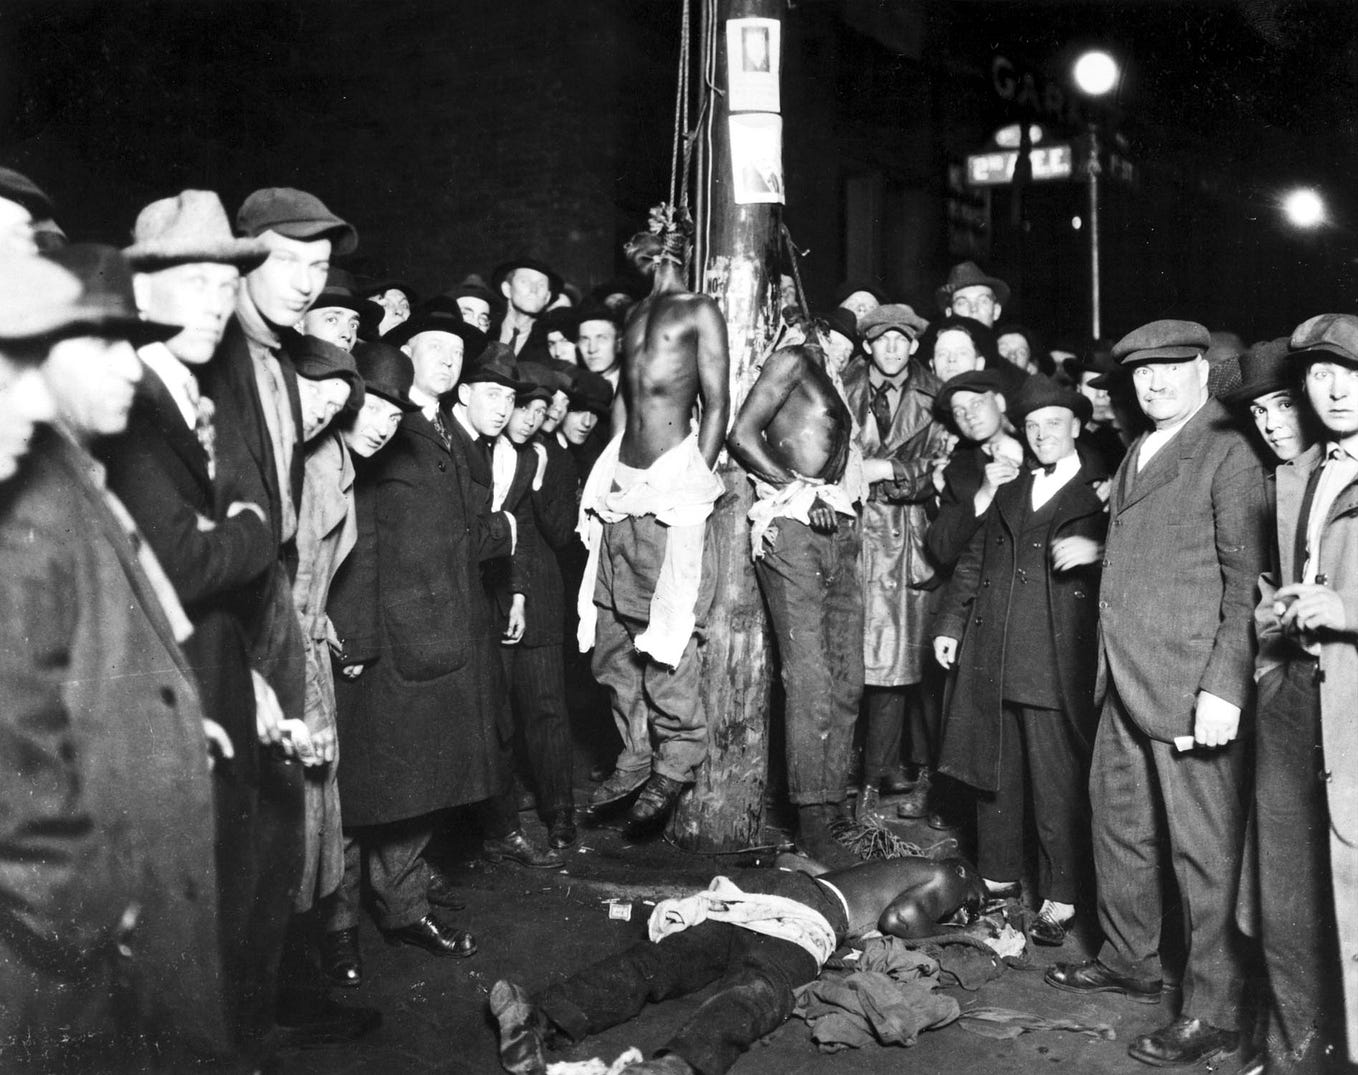 We Must Posthumously Indict Everyone Who Participated In A Lynching.